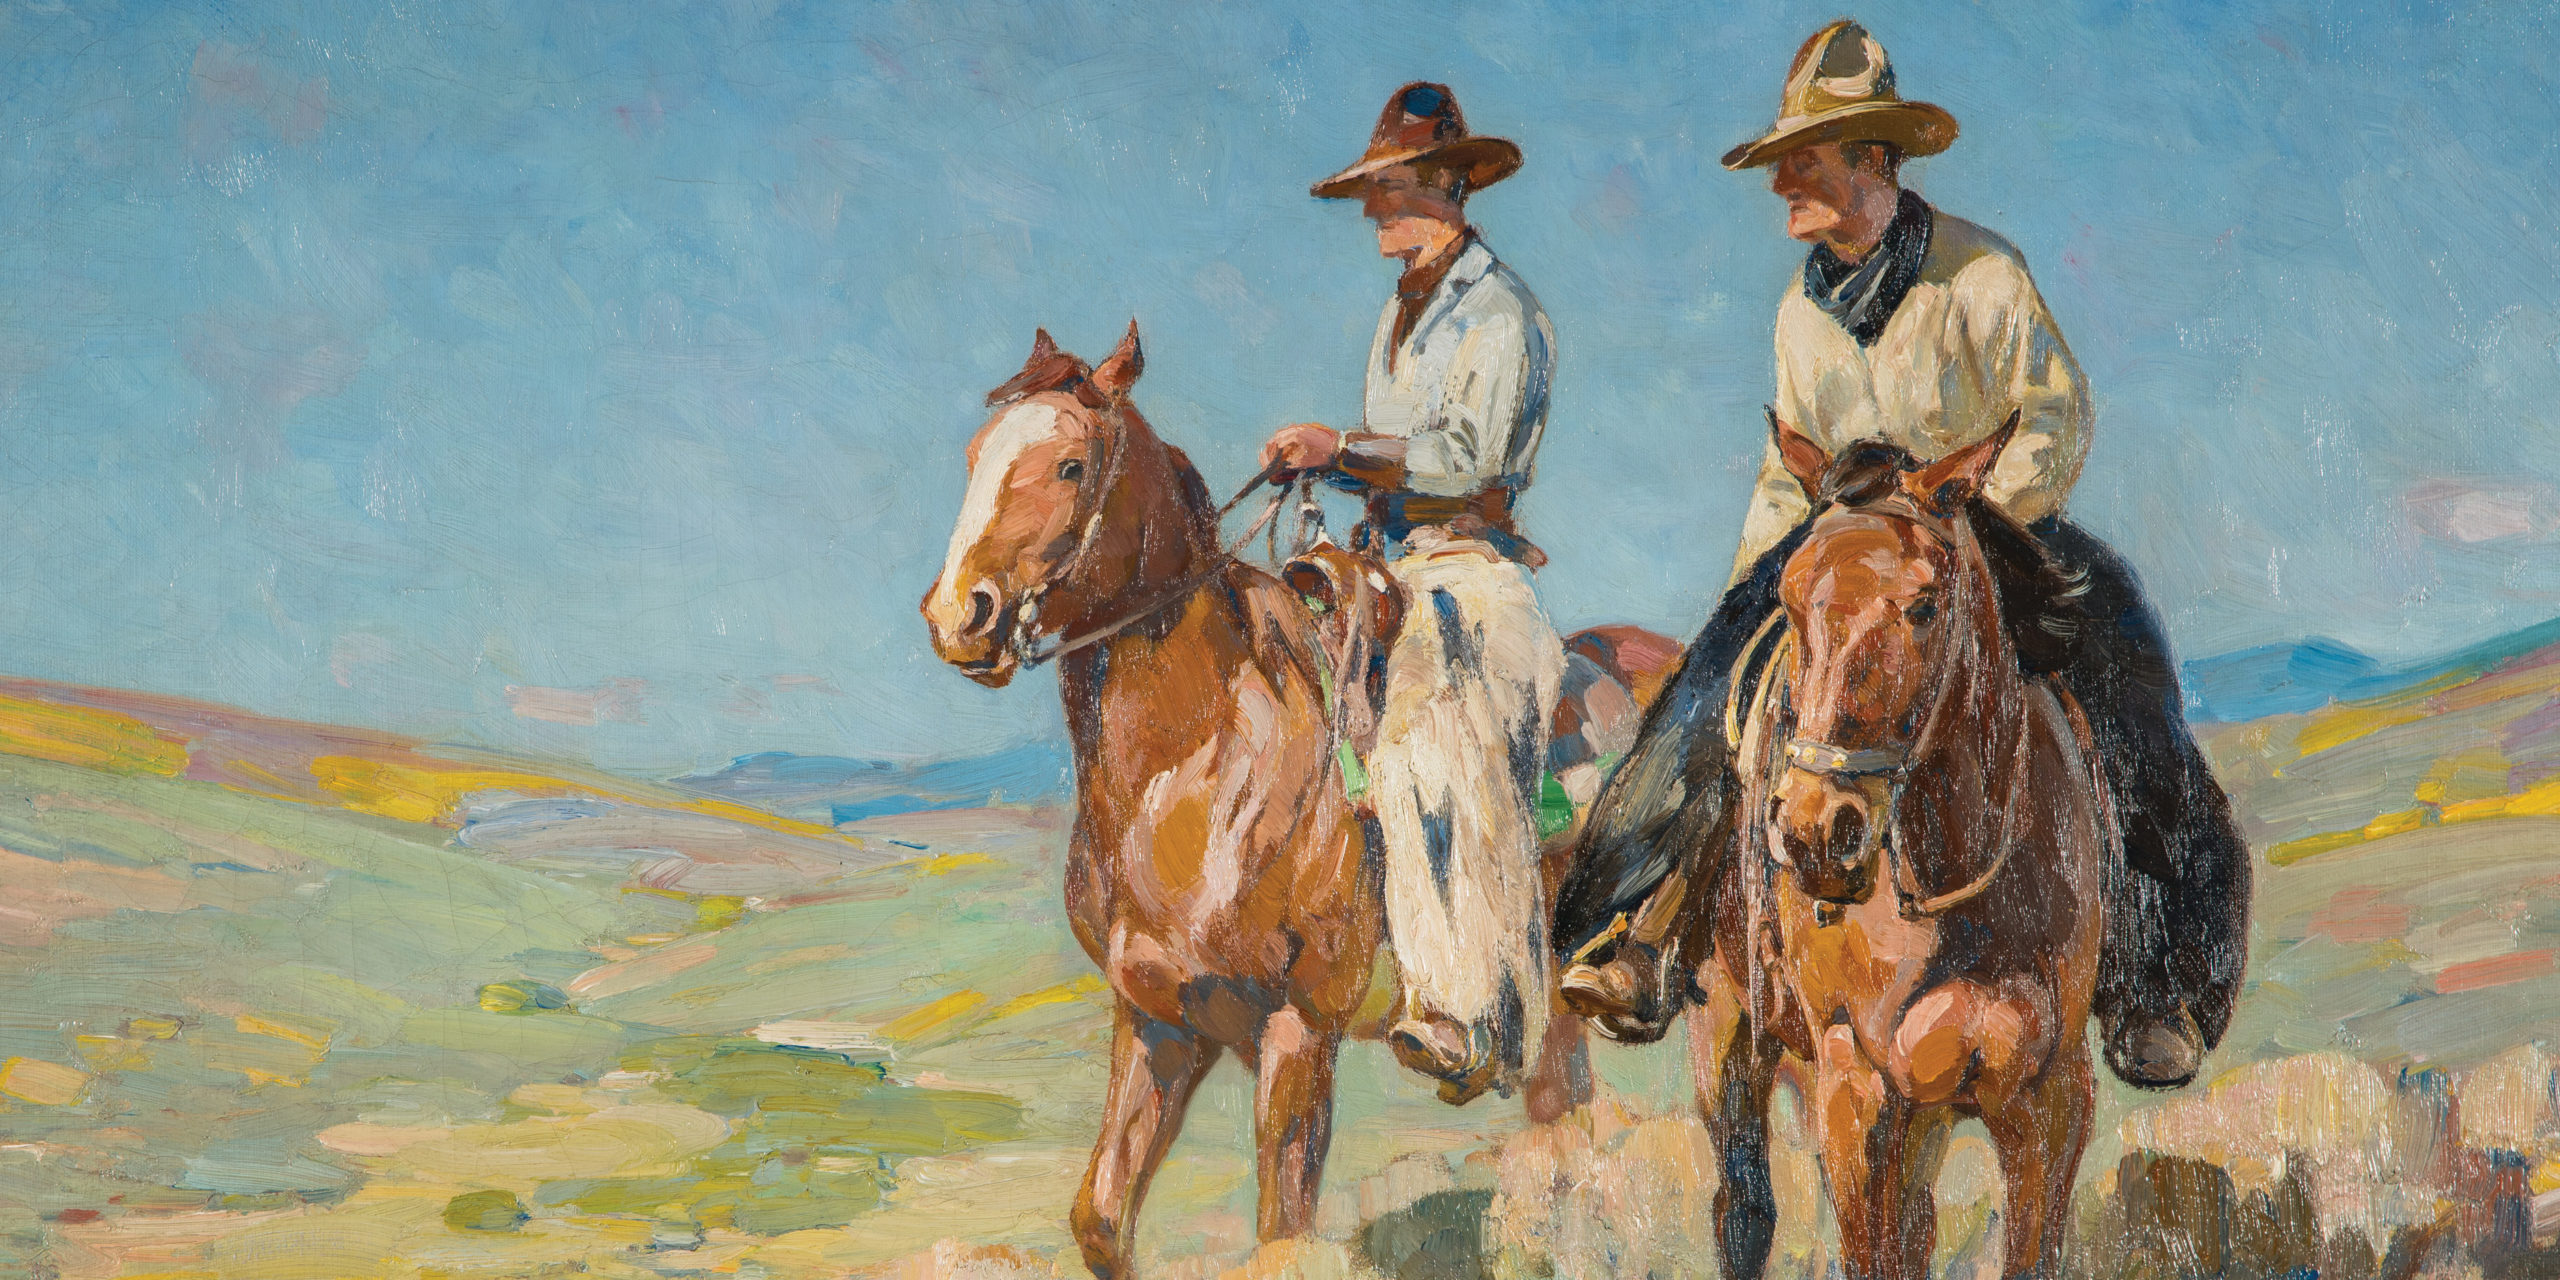 Shelburne Museum’s Upcoming Exhibition, Playing Cowboy, Explores an American Myth